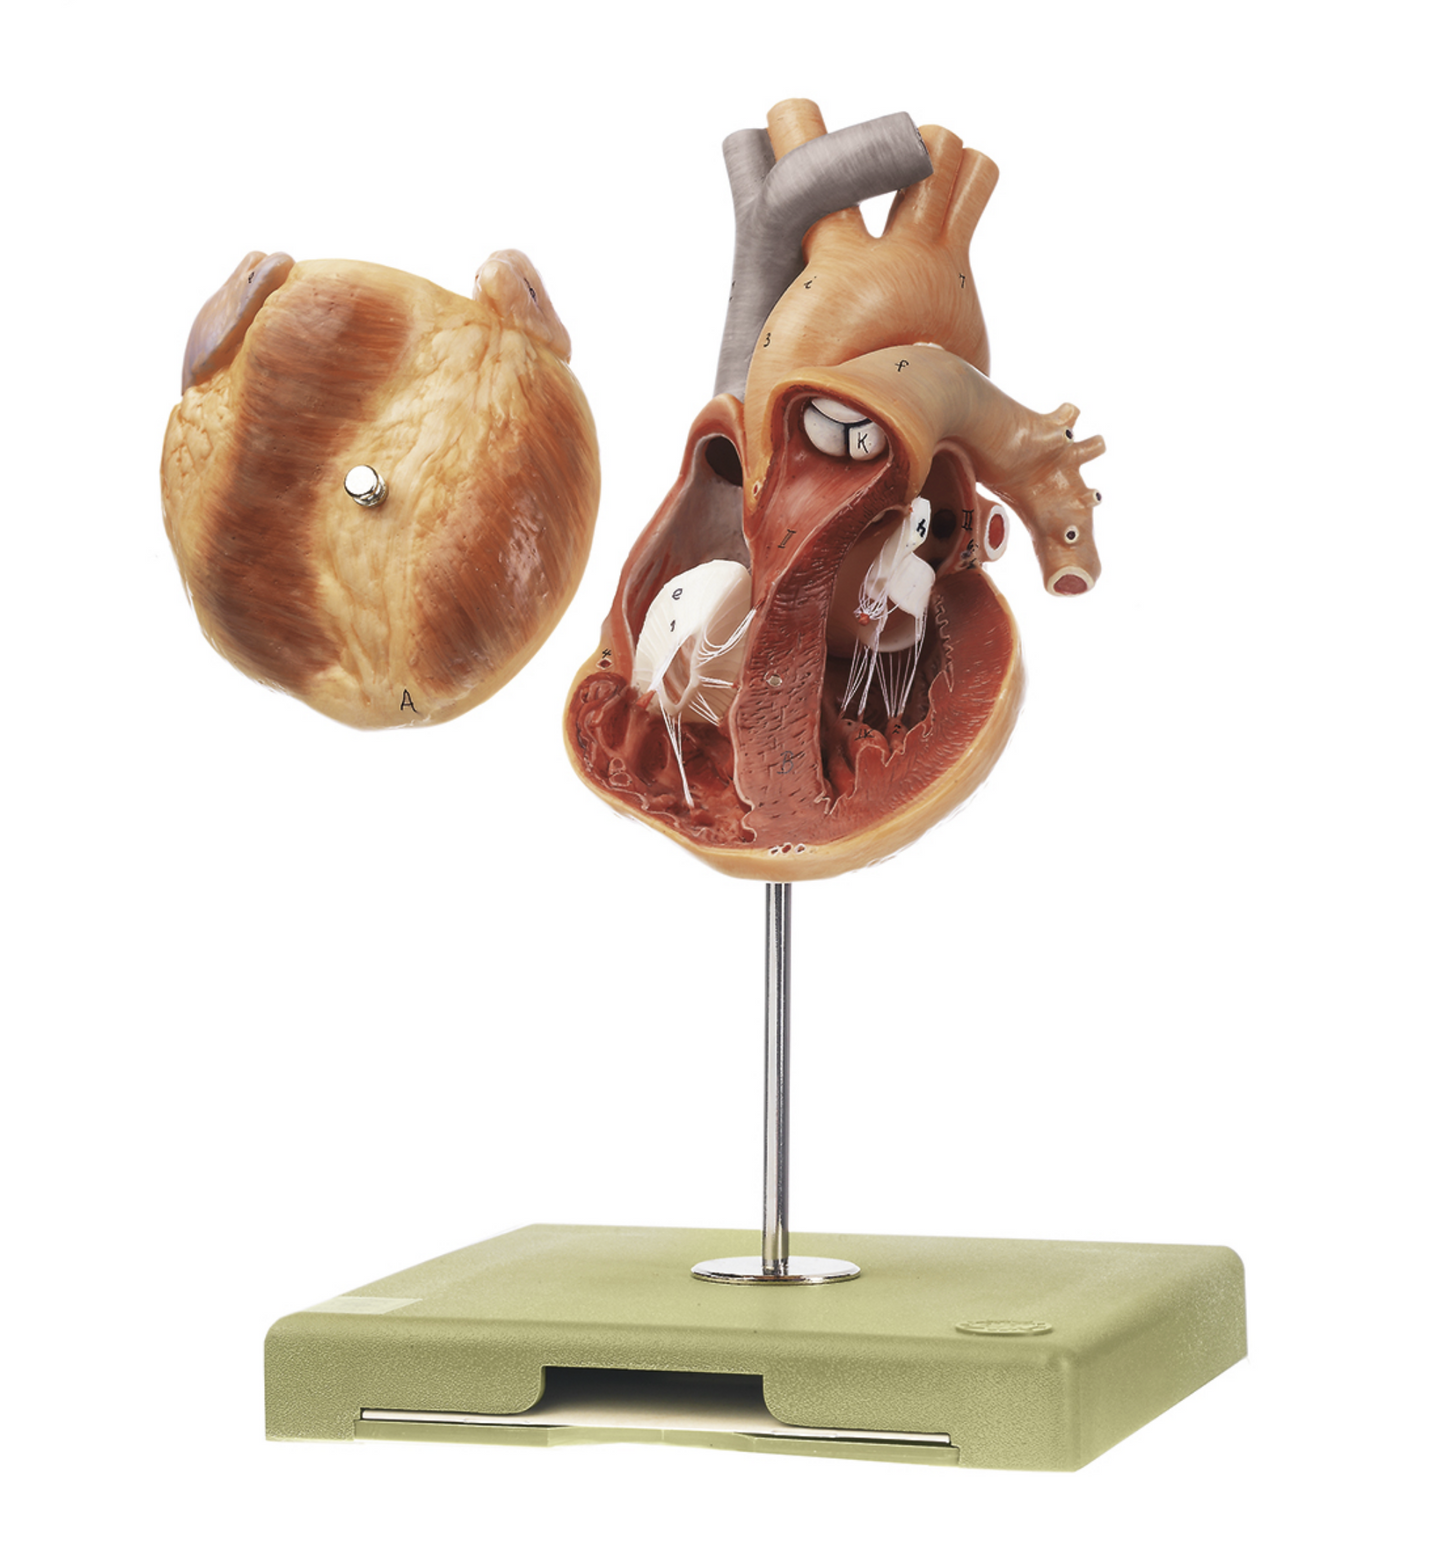 Heart model in life size of the highest quality